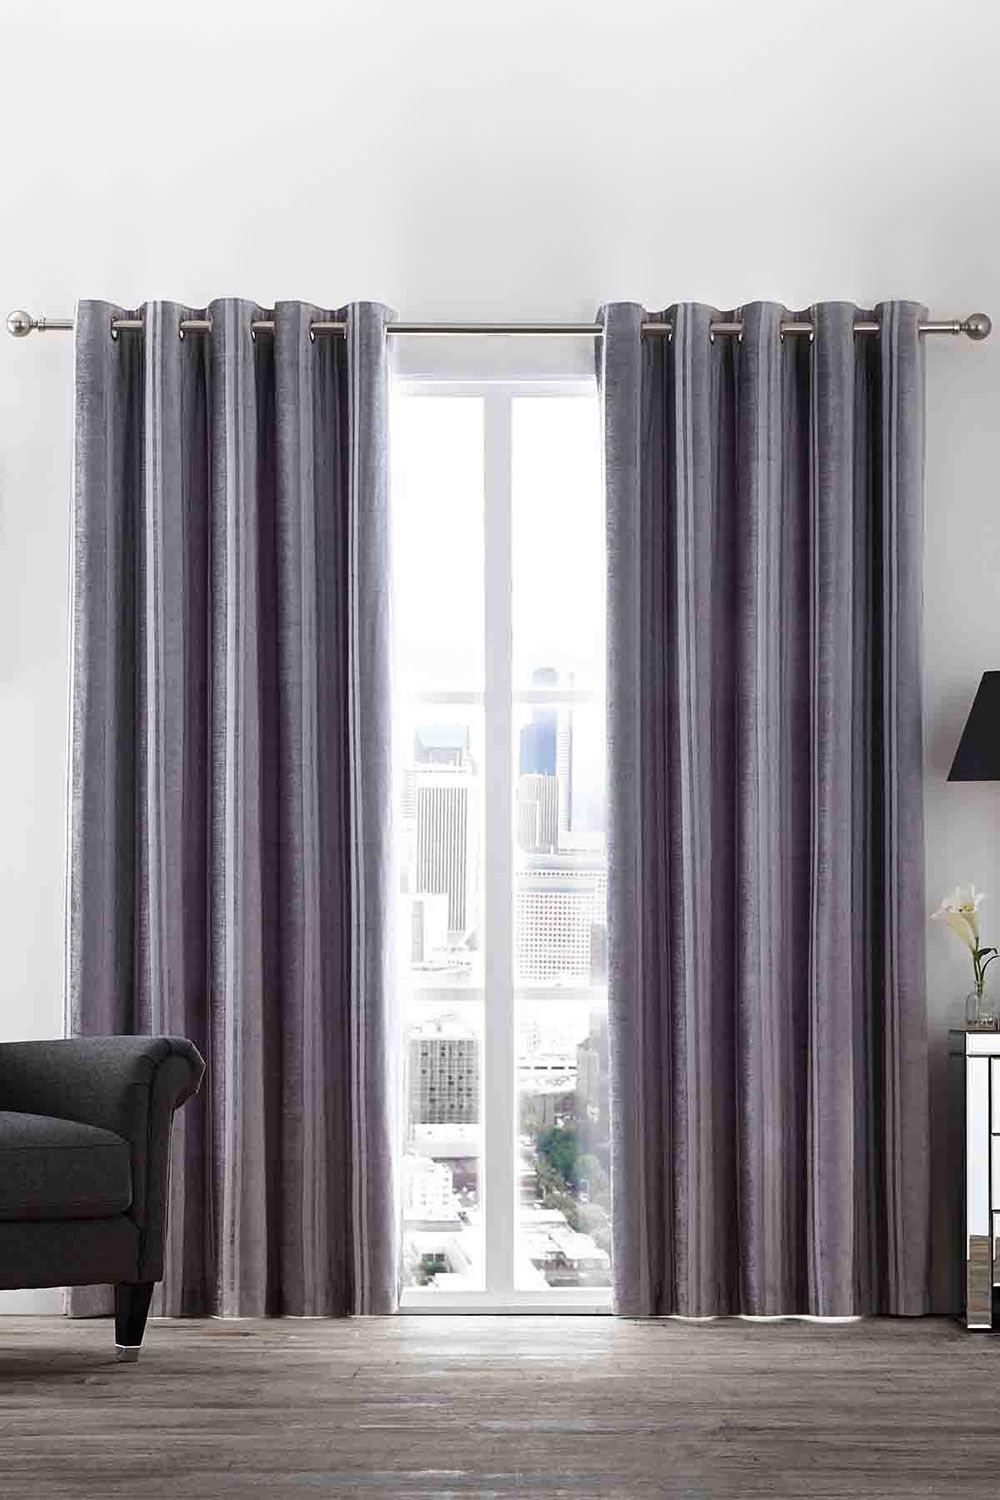 Bonmarche Hotel Stripe Silver Thermal Eyelet Curtain Pair, Size: 46 Inch